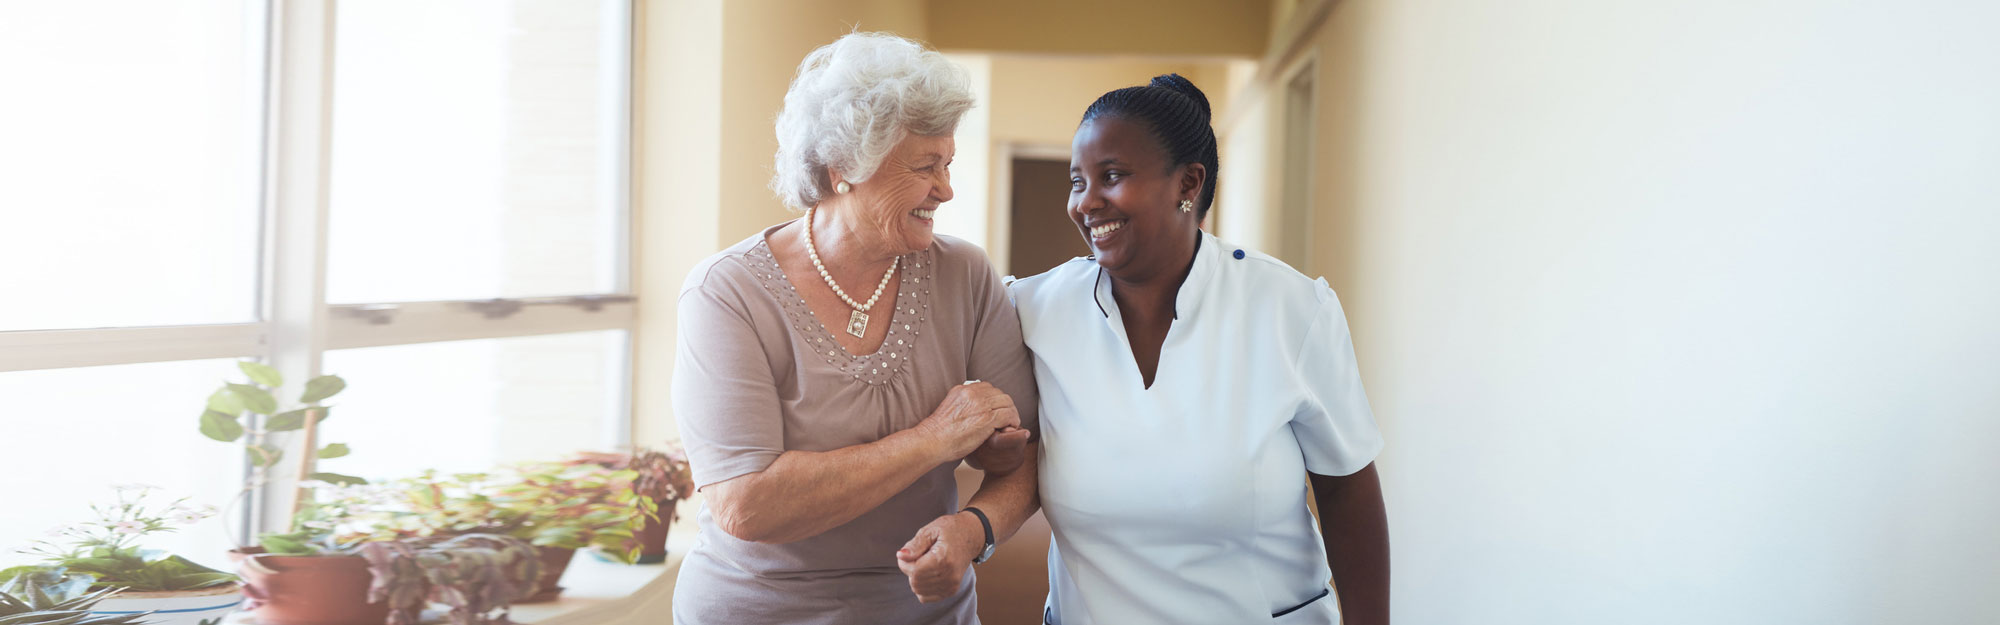 senior woman arm-in-arm with caregiver smiling while walking down a hallway